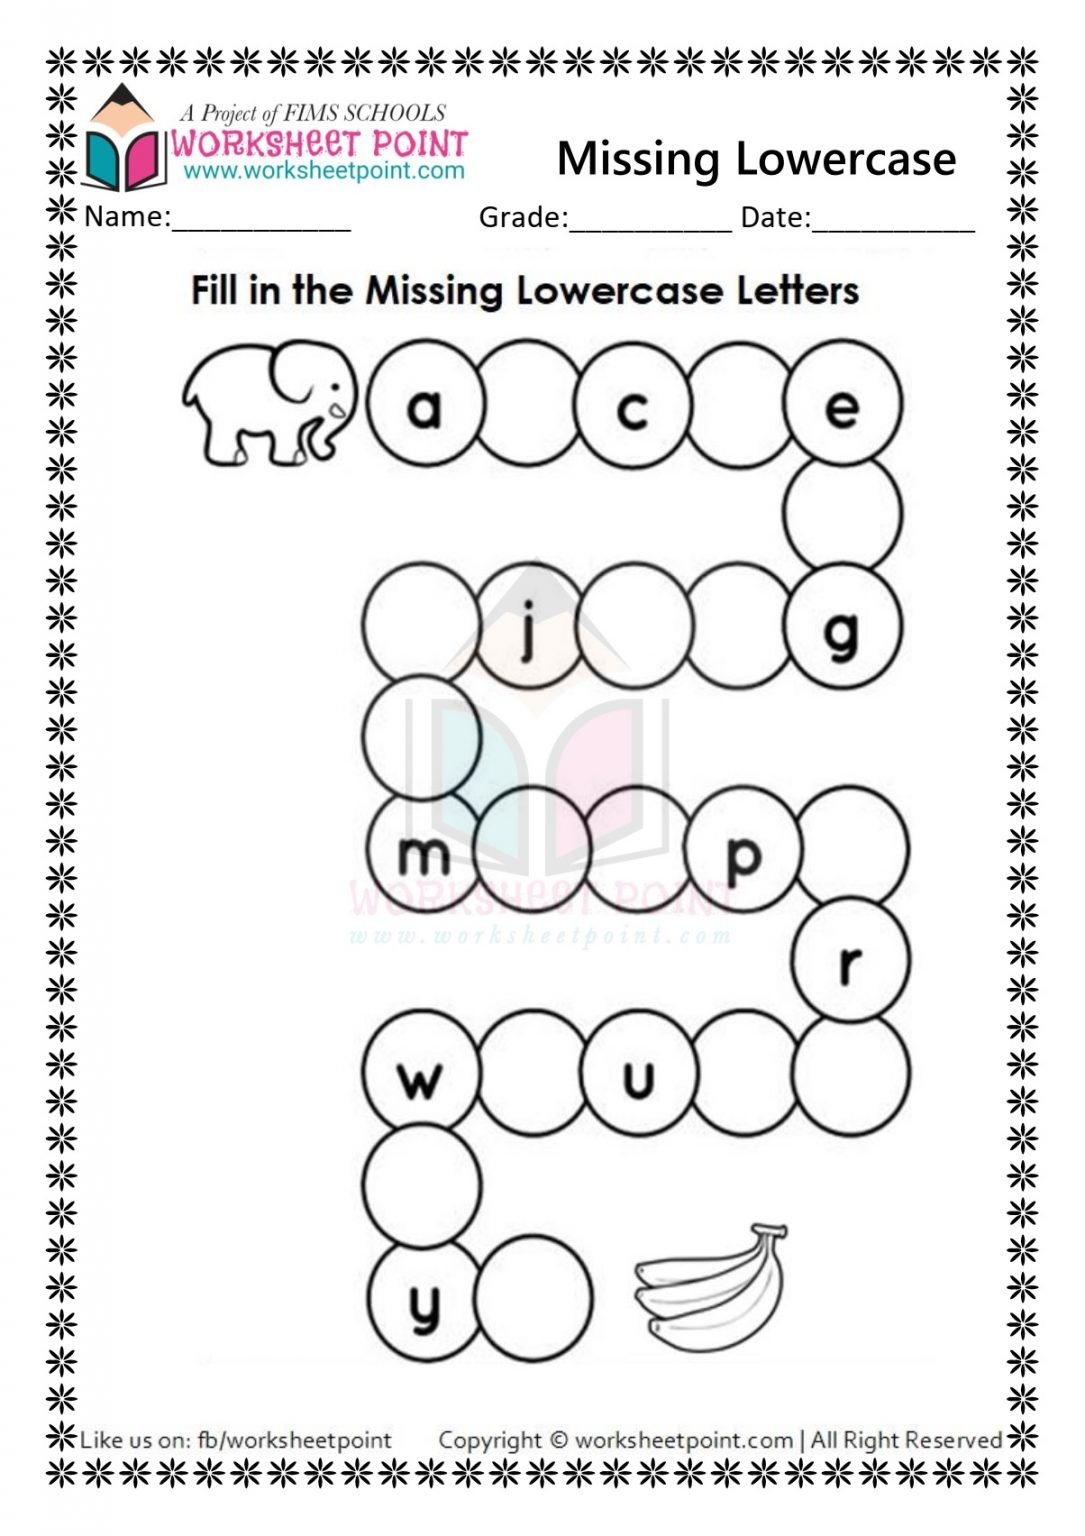 fill-in-the-blank-worksheets-spelling-practice-worksheets-spelling-worksheets-spelling-practice